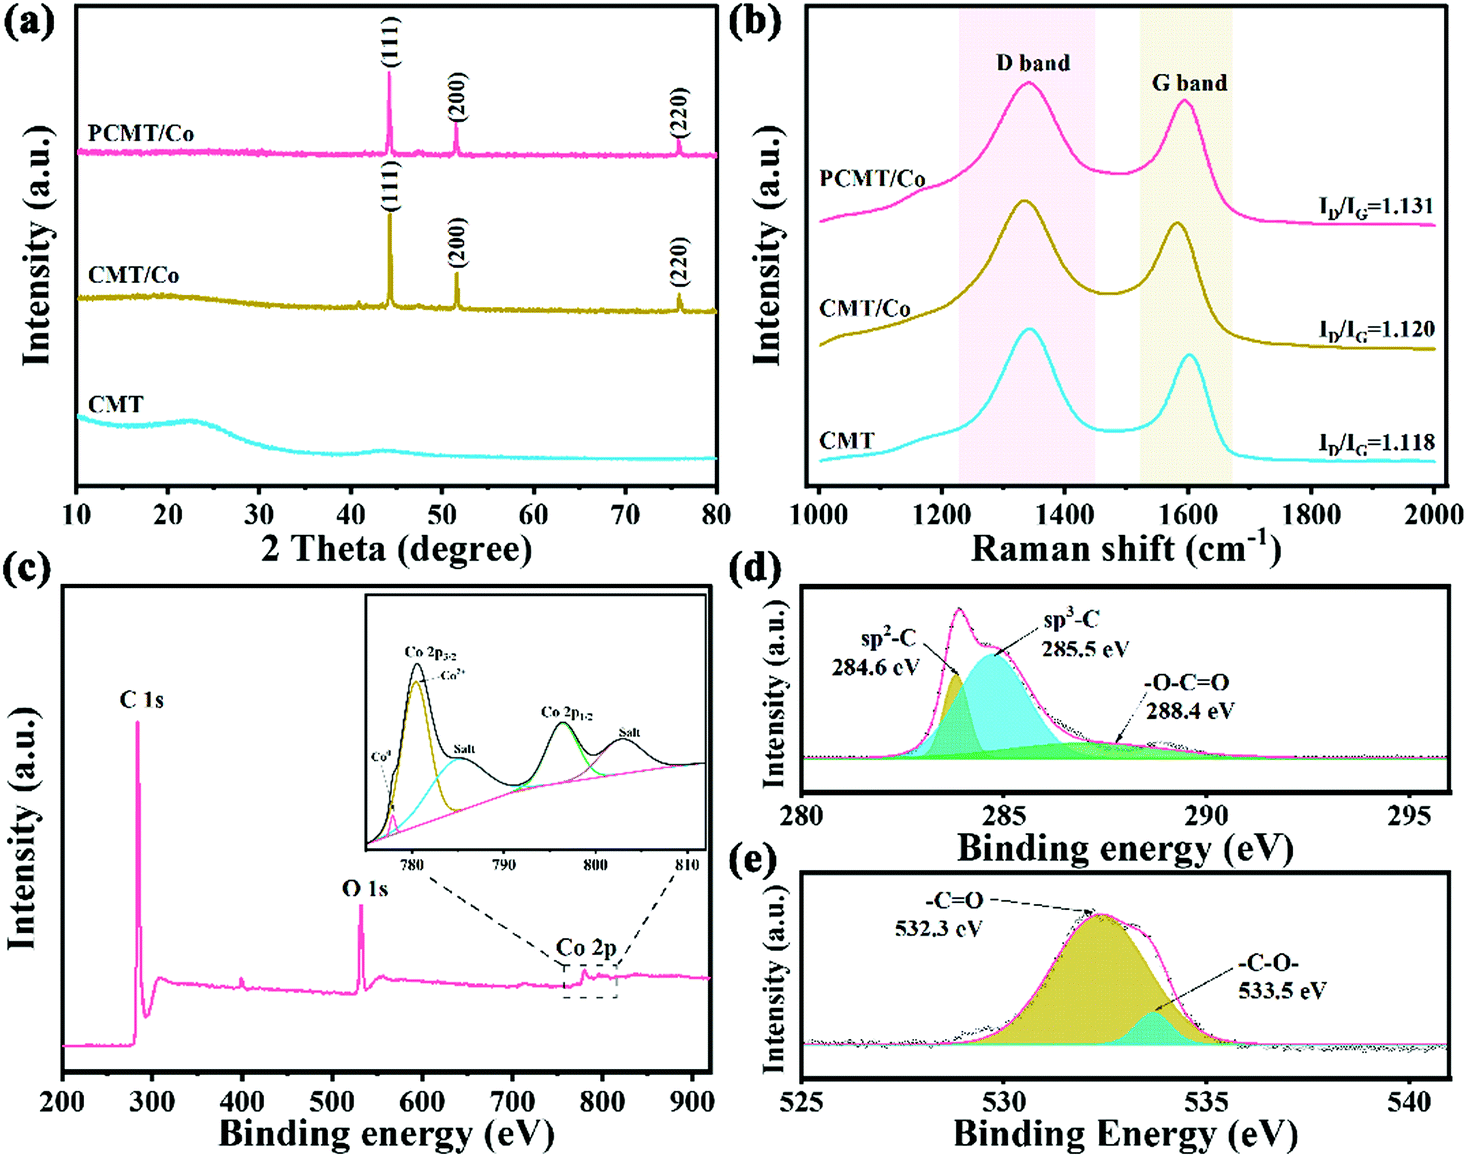 Cobalt Magnetic Particles And Carbon Composite Microtubes As High Performance Electromagnetic Wave Absorbers Journal Of Materials Chemistry C Rsc Publishing Doi 10 1039 D0tcg